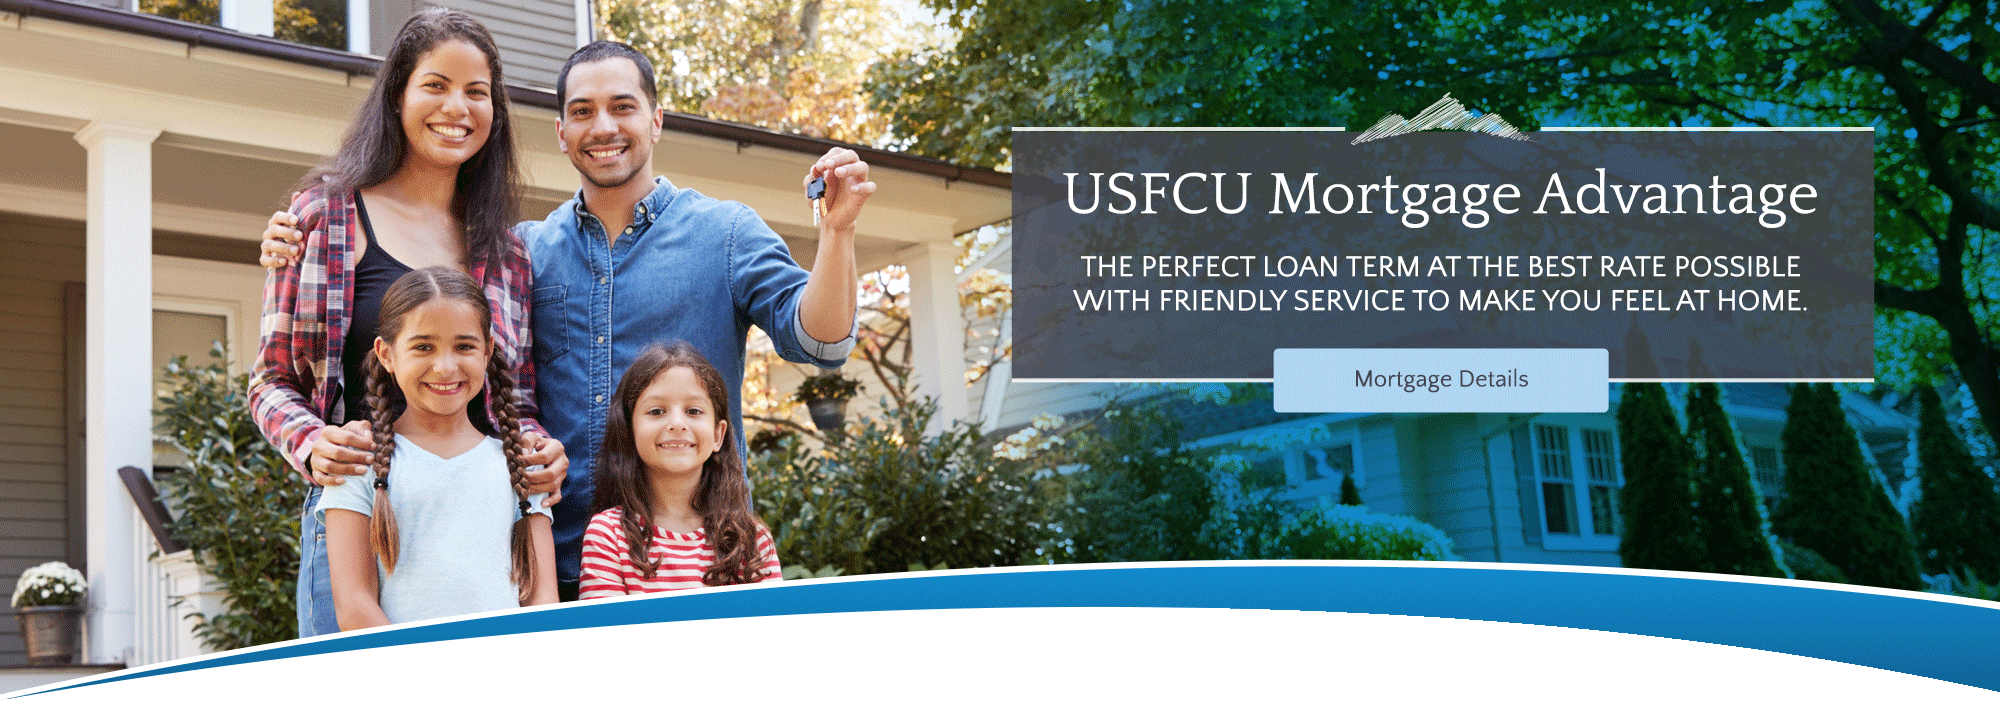 USFCU Mortgage Advantage The perfect loan term at the best rate possible with friendly service to make you feel at home. Mortgage Details